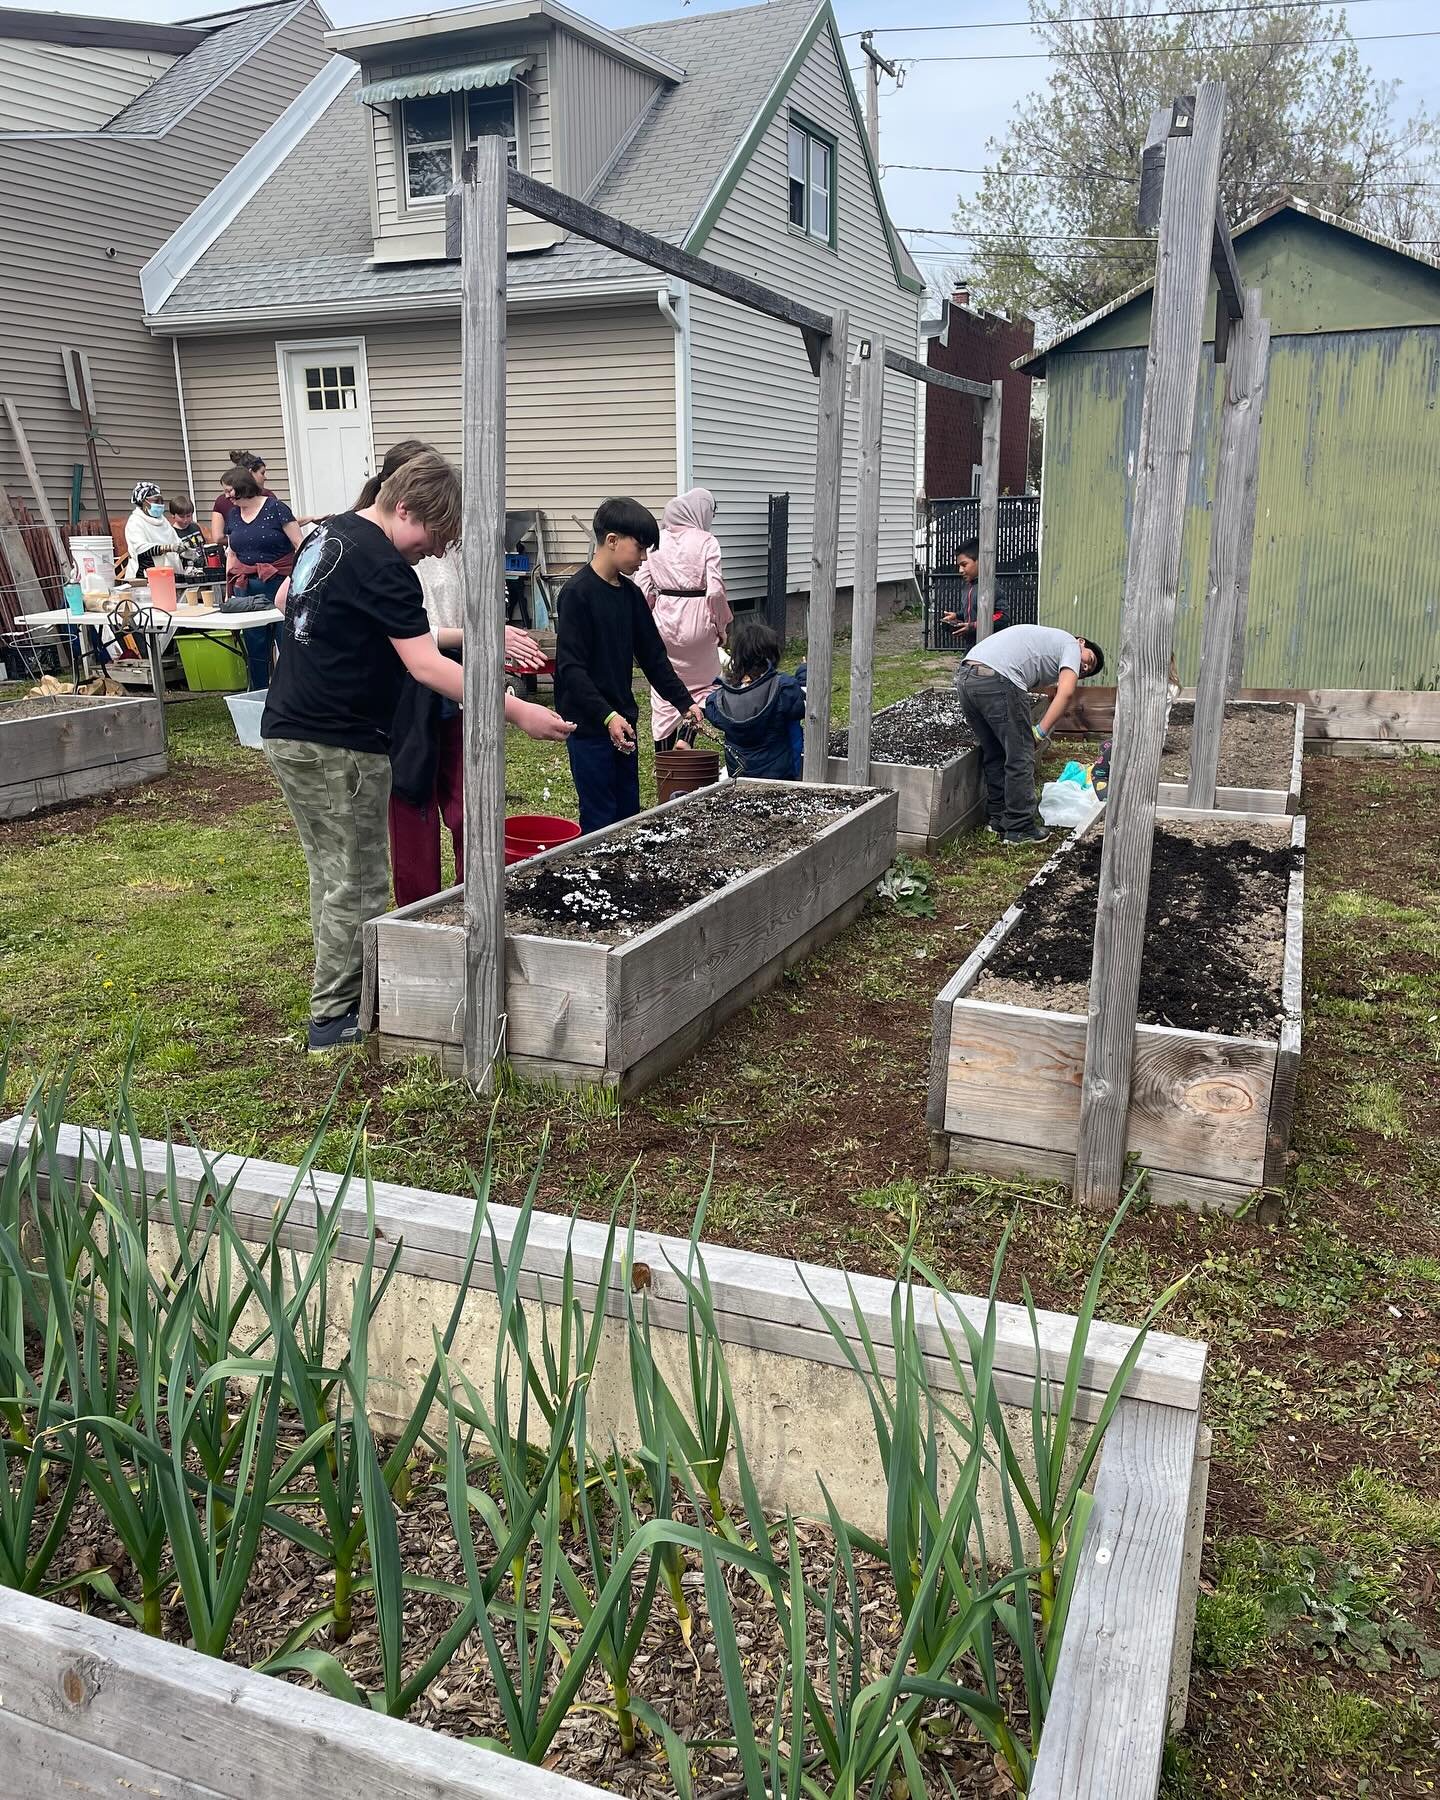 Some pictures from our Gardening Workshop last weekend 🌱 🪴 

We learned how to plant seeds and prepare the soil in our community garden! We are very thankful to Richard D @rcdaley at Sunray Sustainability and everyone who joined!!

And thanks again